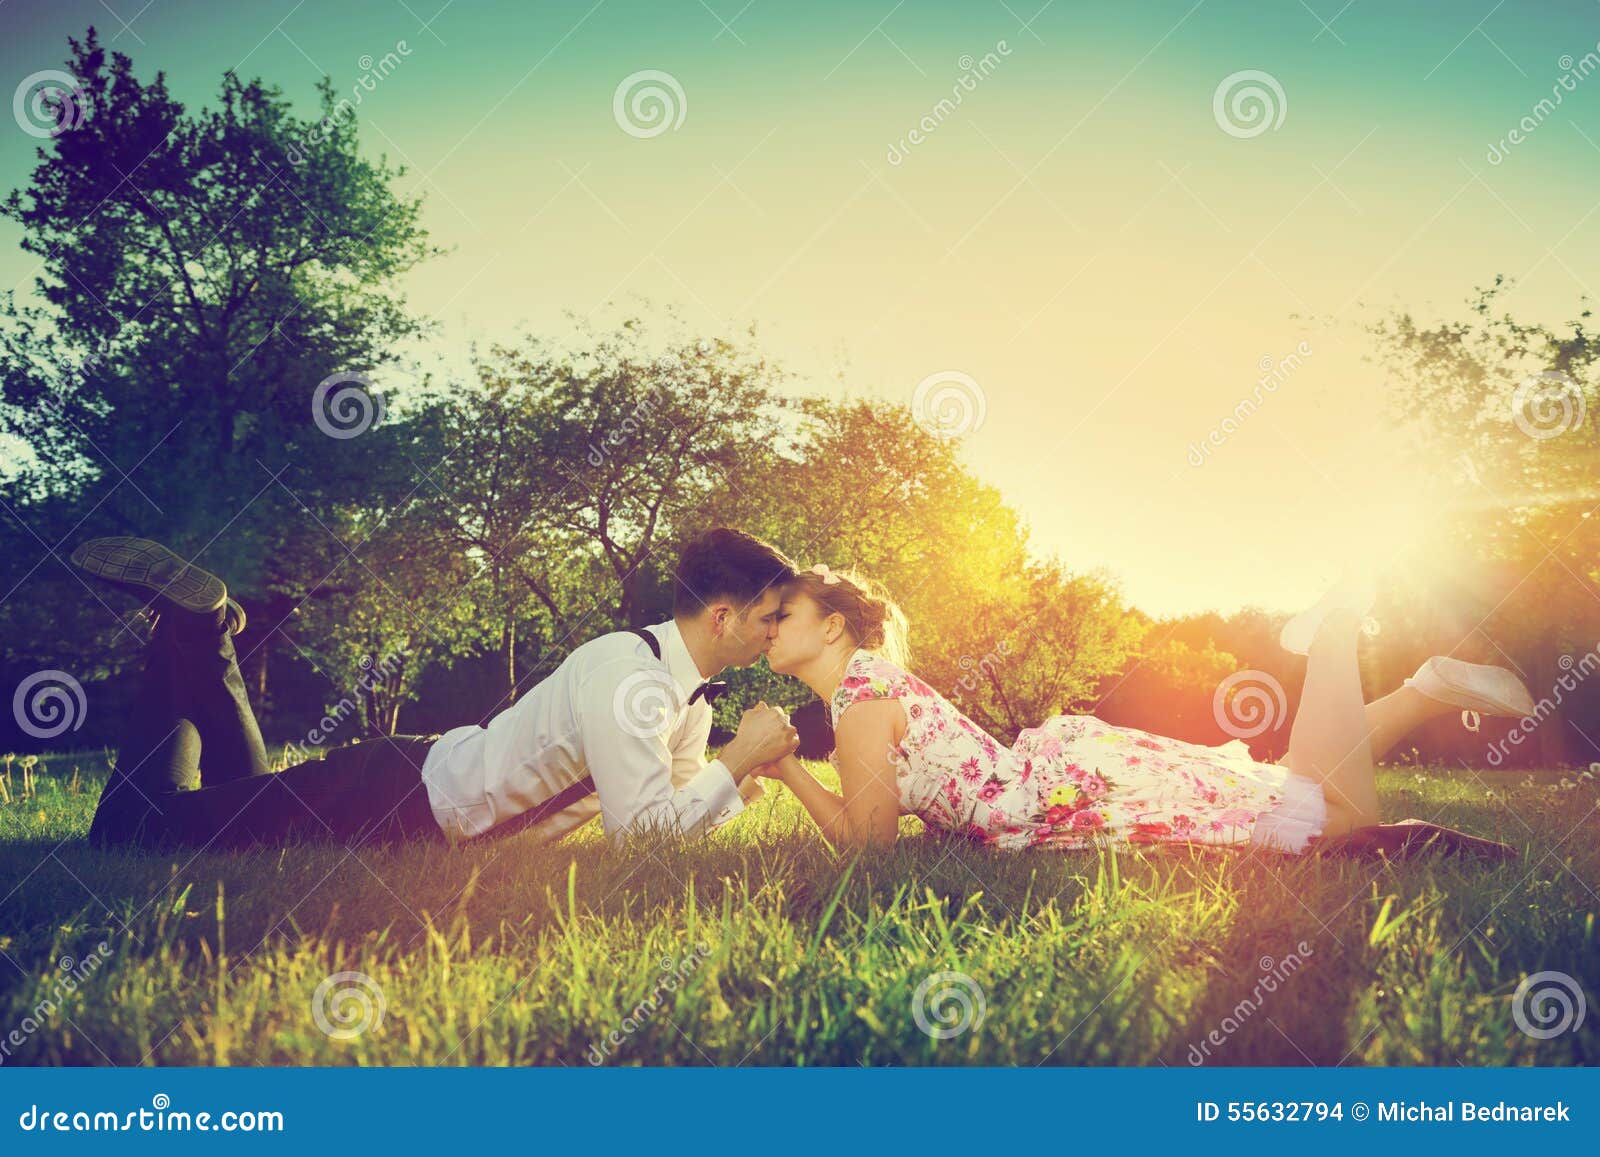 romantic couple in love kissing while lying on grass. vintage